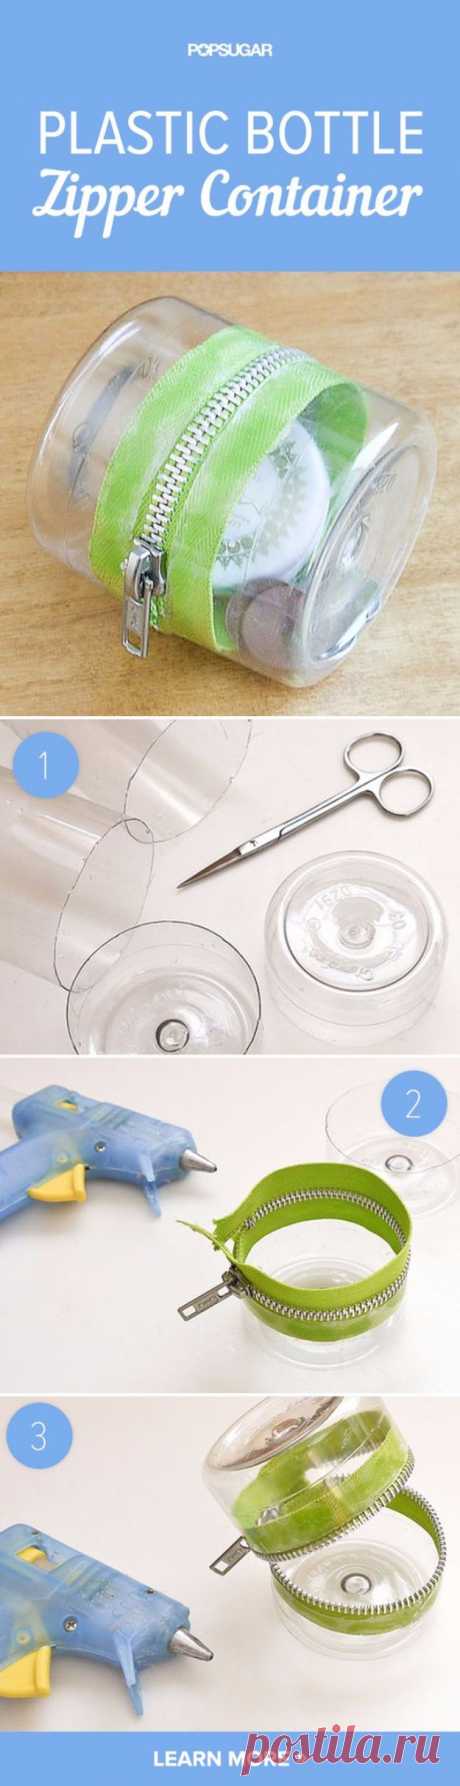 DIY Projects For Home: Cool DIY Projects Made With Plastic Bottles - Plastic Bottle Zipper Container - Best Easy Crafts and DIY Ideas Made With A Recycled Plastic Bottle - Jewlery, Home Decor, Planters, Craft Project Tutorials - Cheap Ways to Decorate and Creative DIY Gifts for Christmas Holidays - Fun Projects for Adults, Teens and Kids diyjoy.com/...